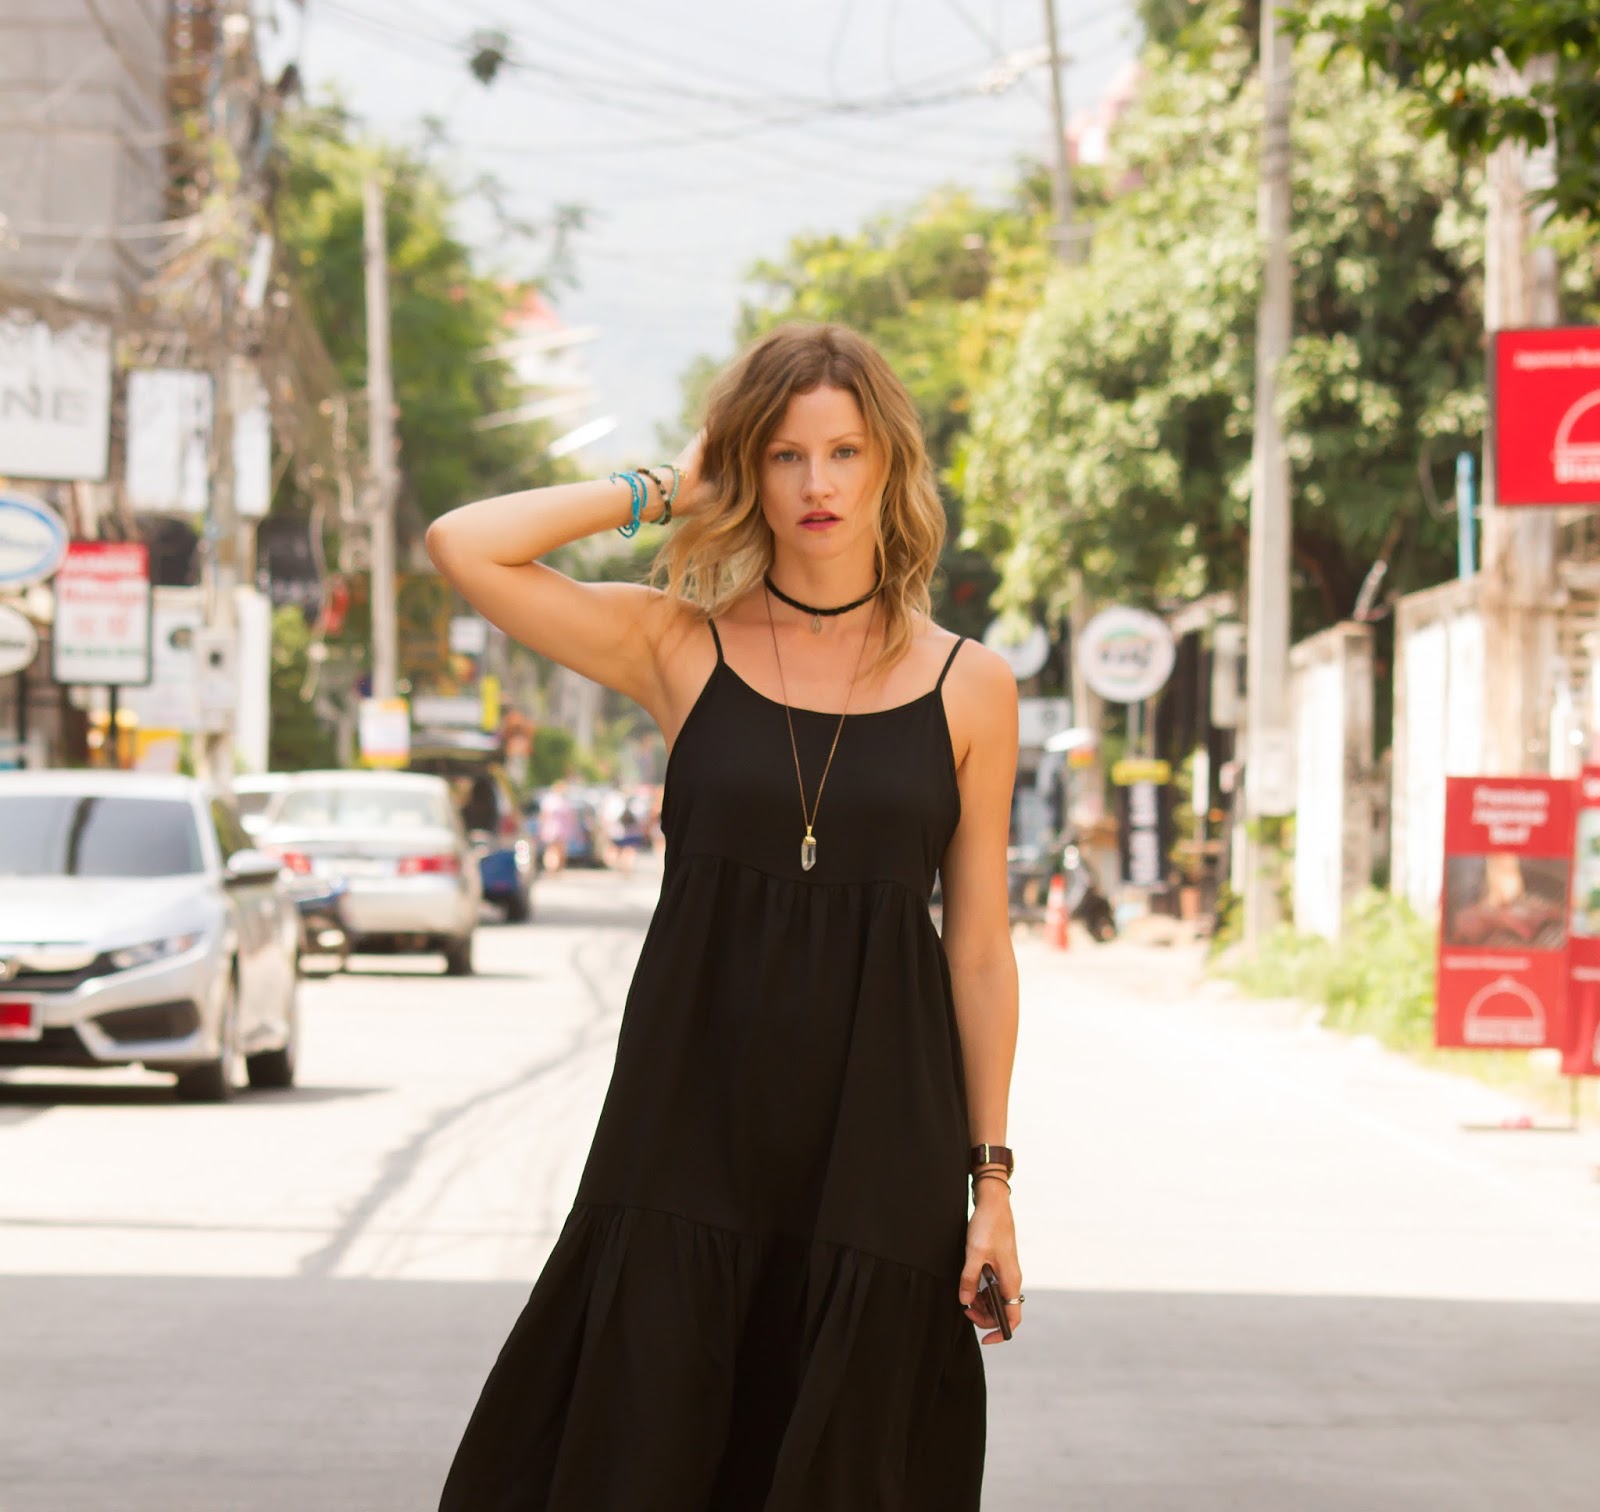 Fashion and Travel Blogger, Alison Hutchinson, is wearing a black dress during the mourning period in Chiang Mai, Thailand